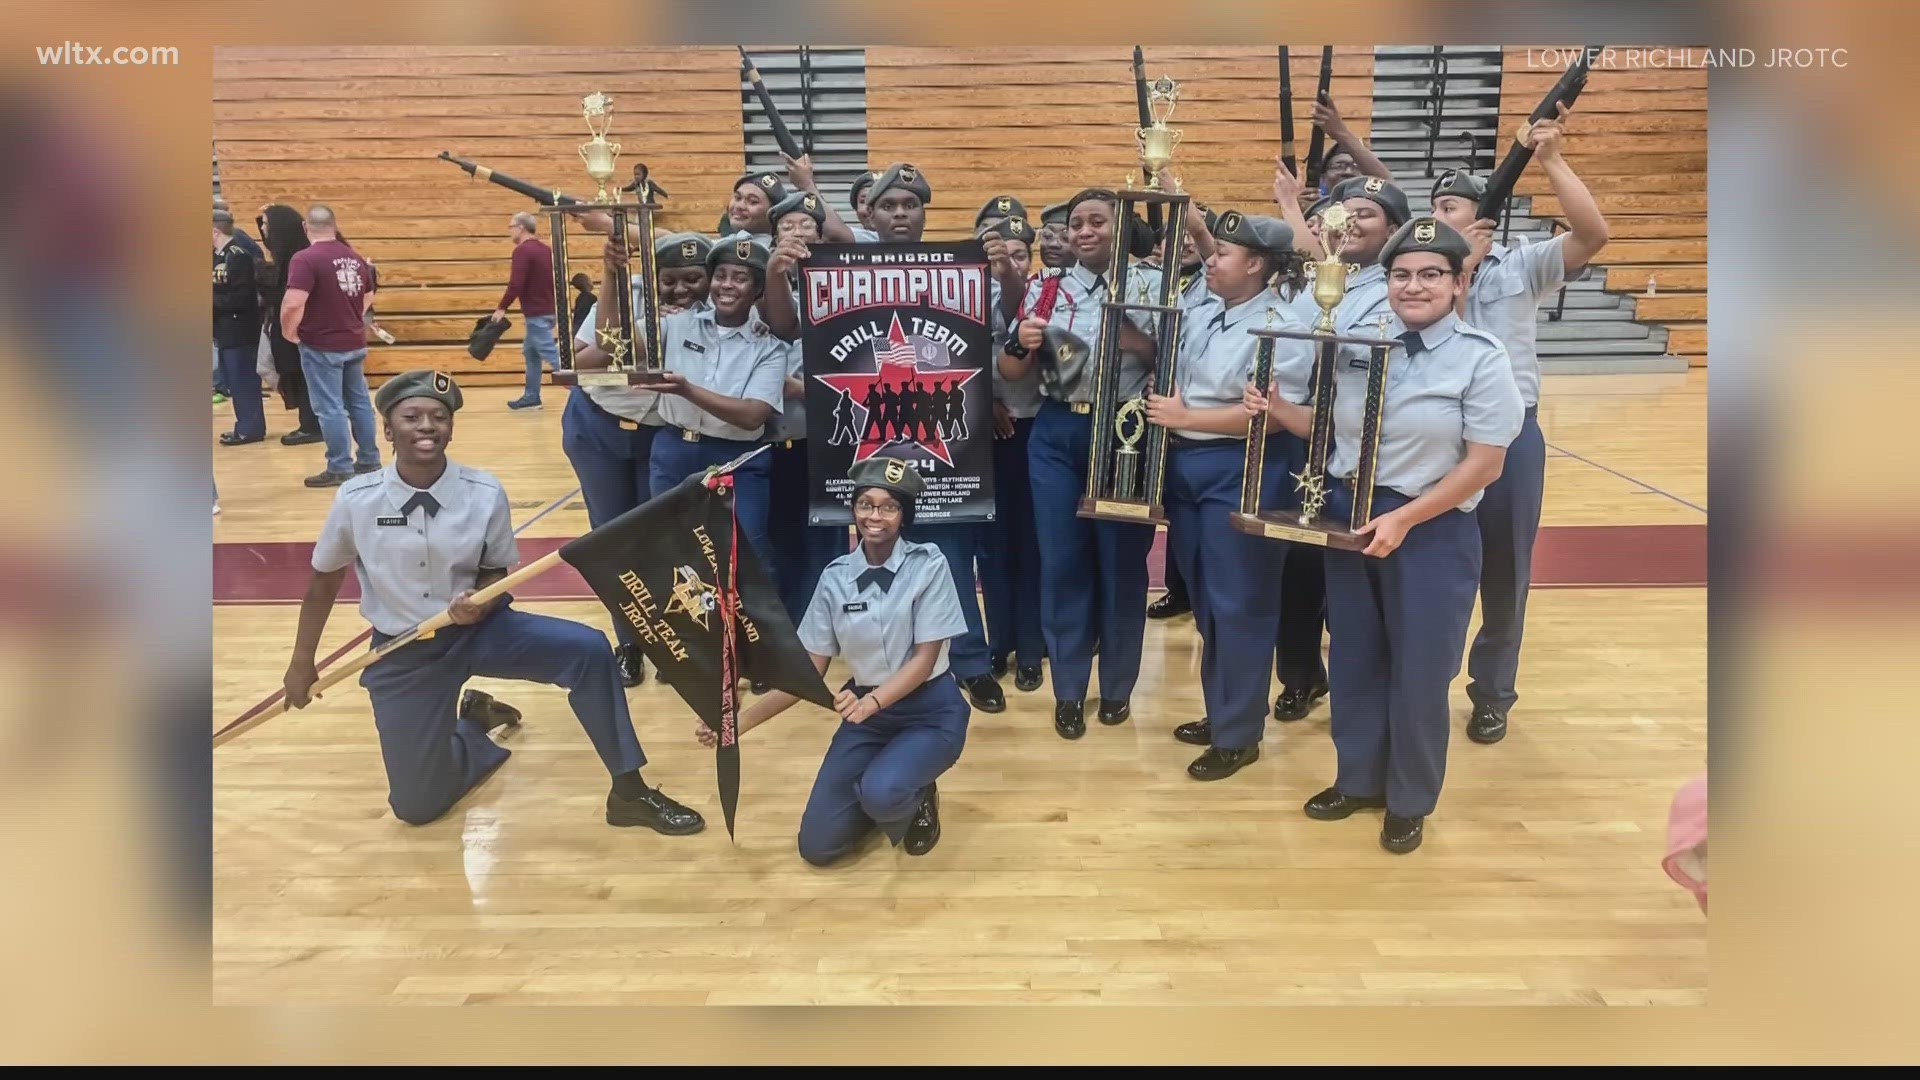 The Lower Richland High School team won first place at the regional armed drill competition.